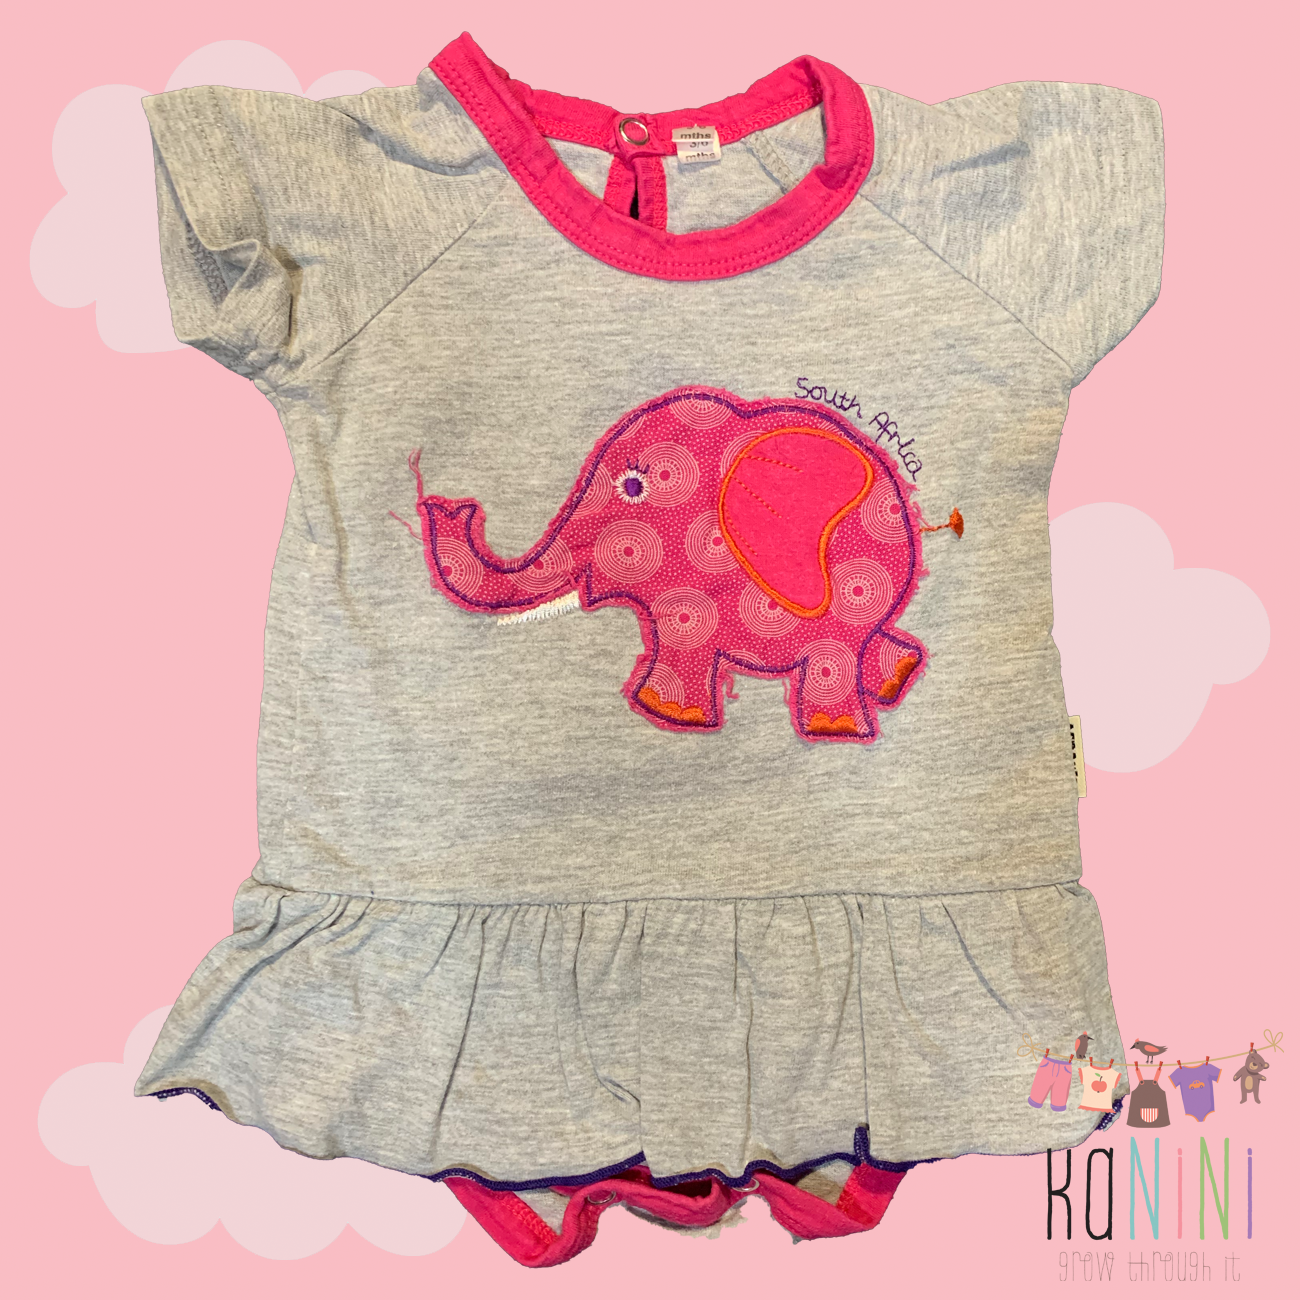 Featured image for “Afrokid 3-6 Months Girls Elephant Dress”